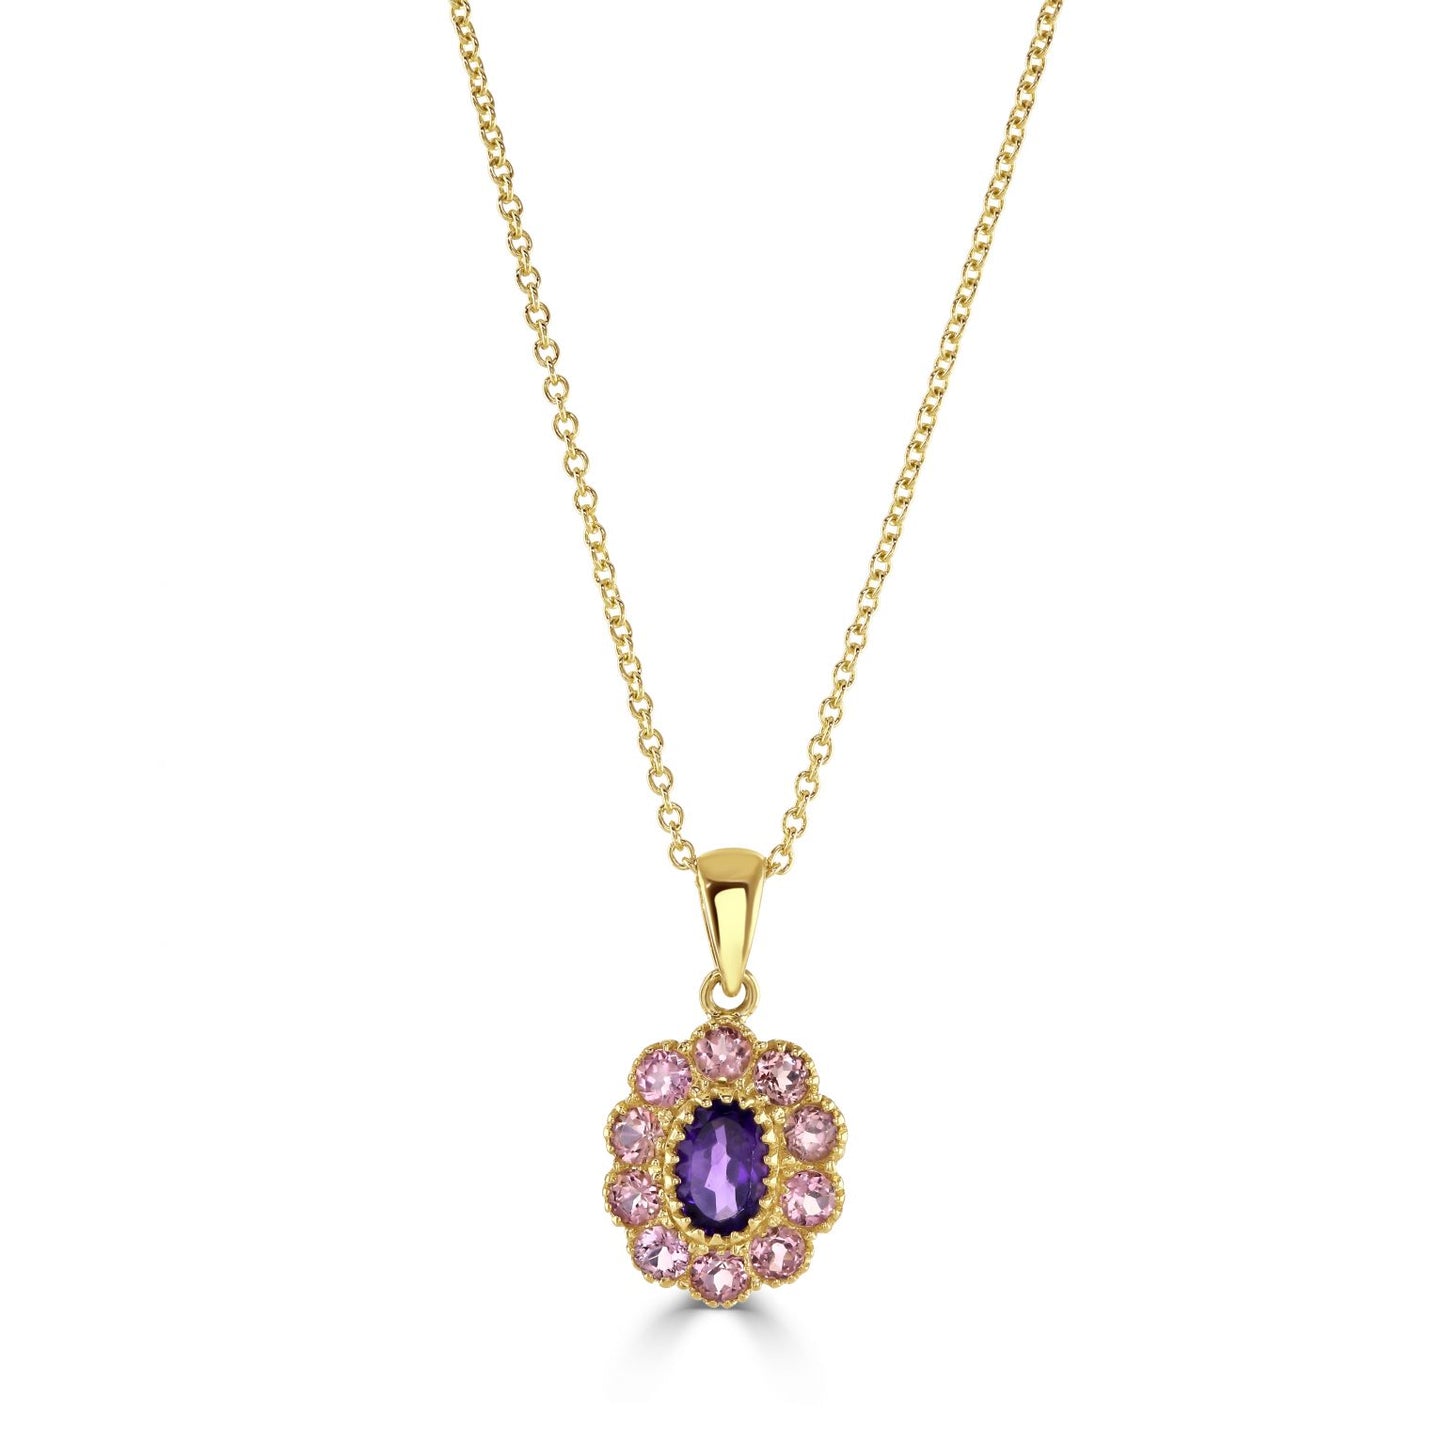 9ct Gold Amethyst And Pink Tourmaline Necklace